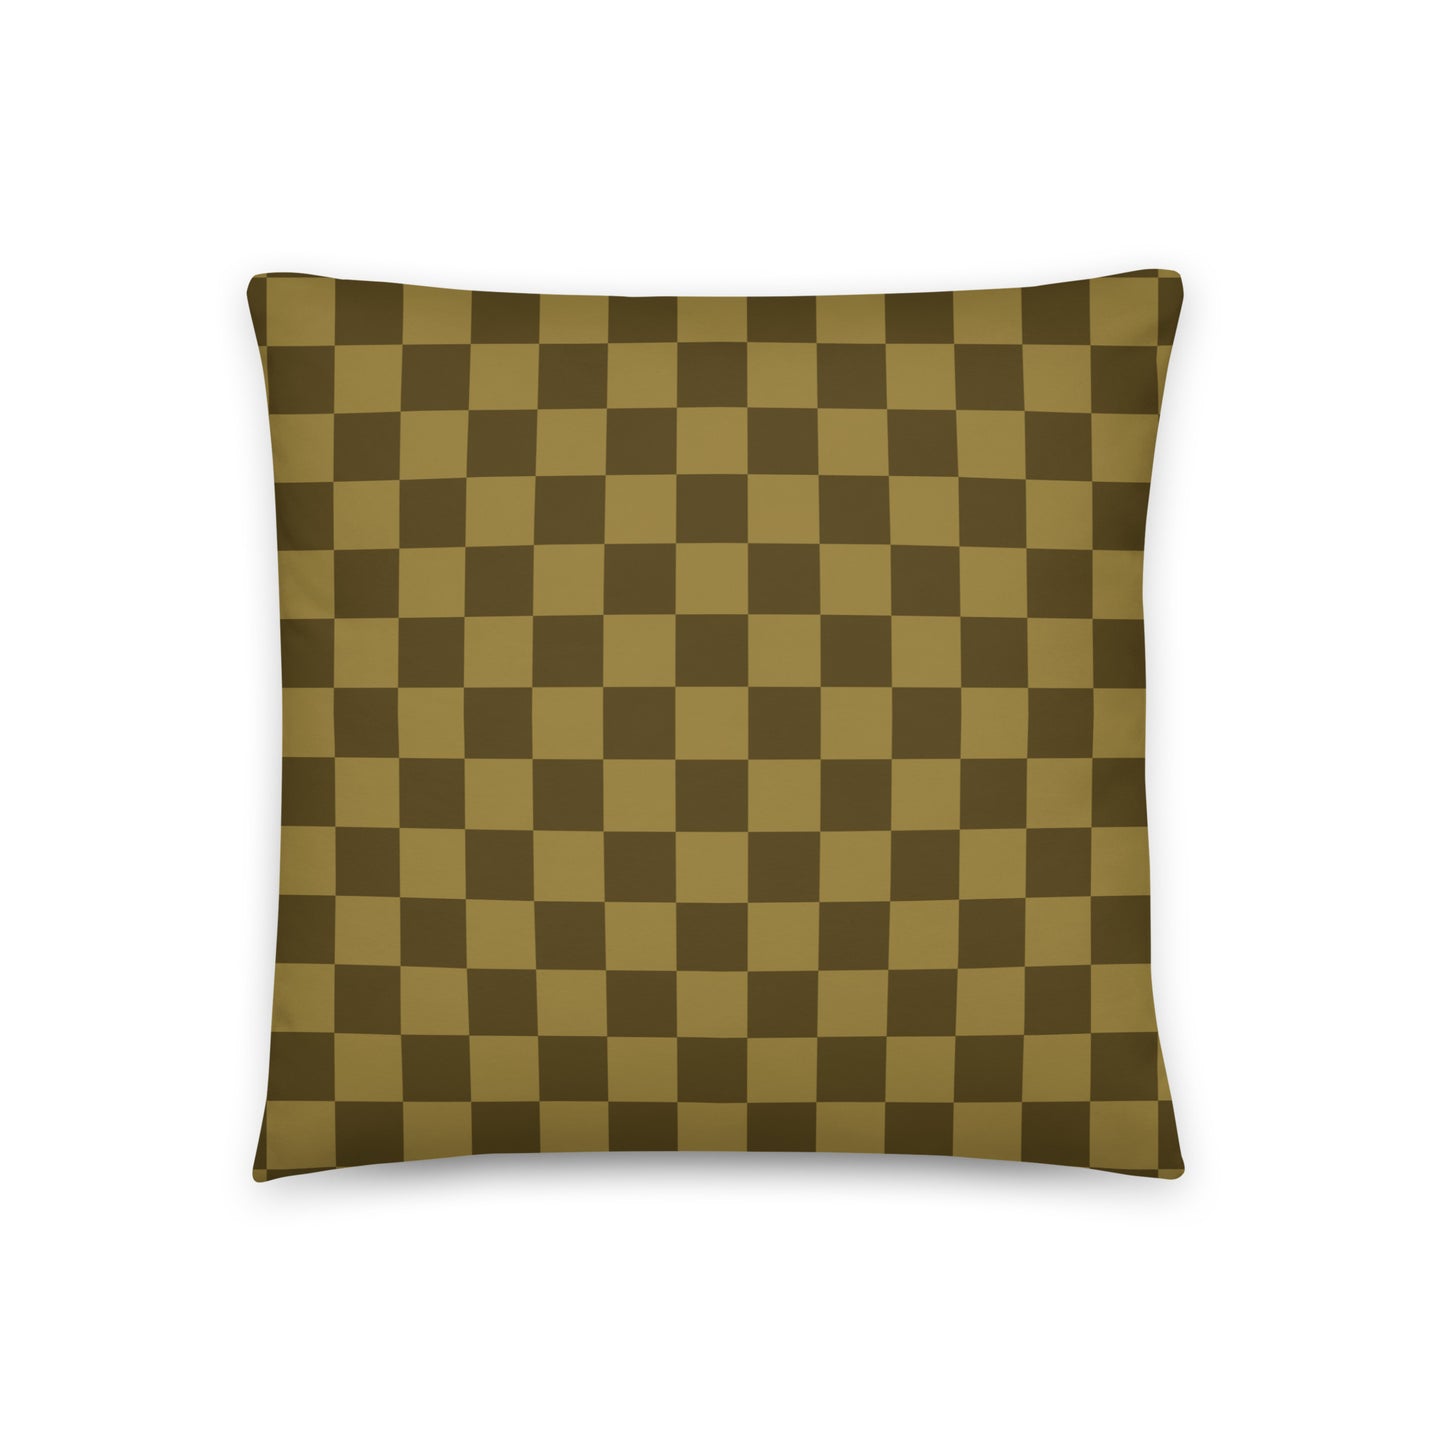 Wempy Dyocta Koto Signature Casual - Sustainably Made Pillow